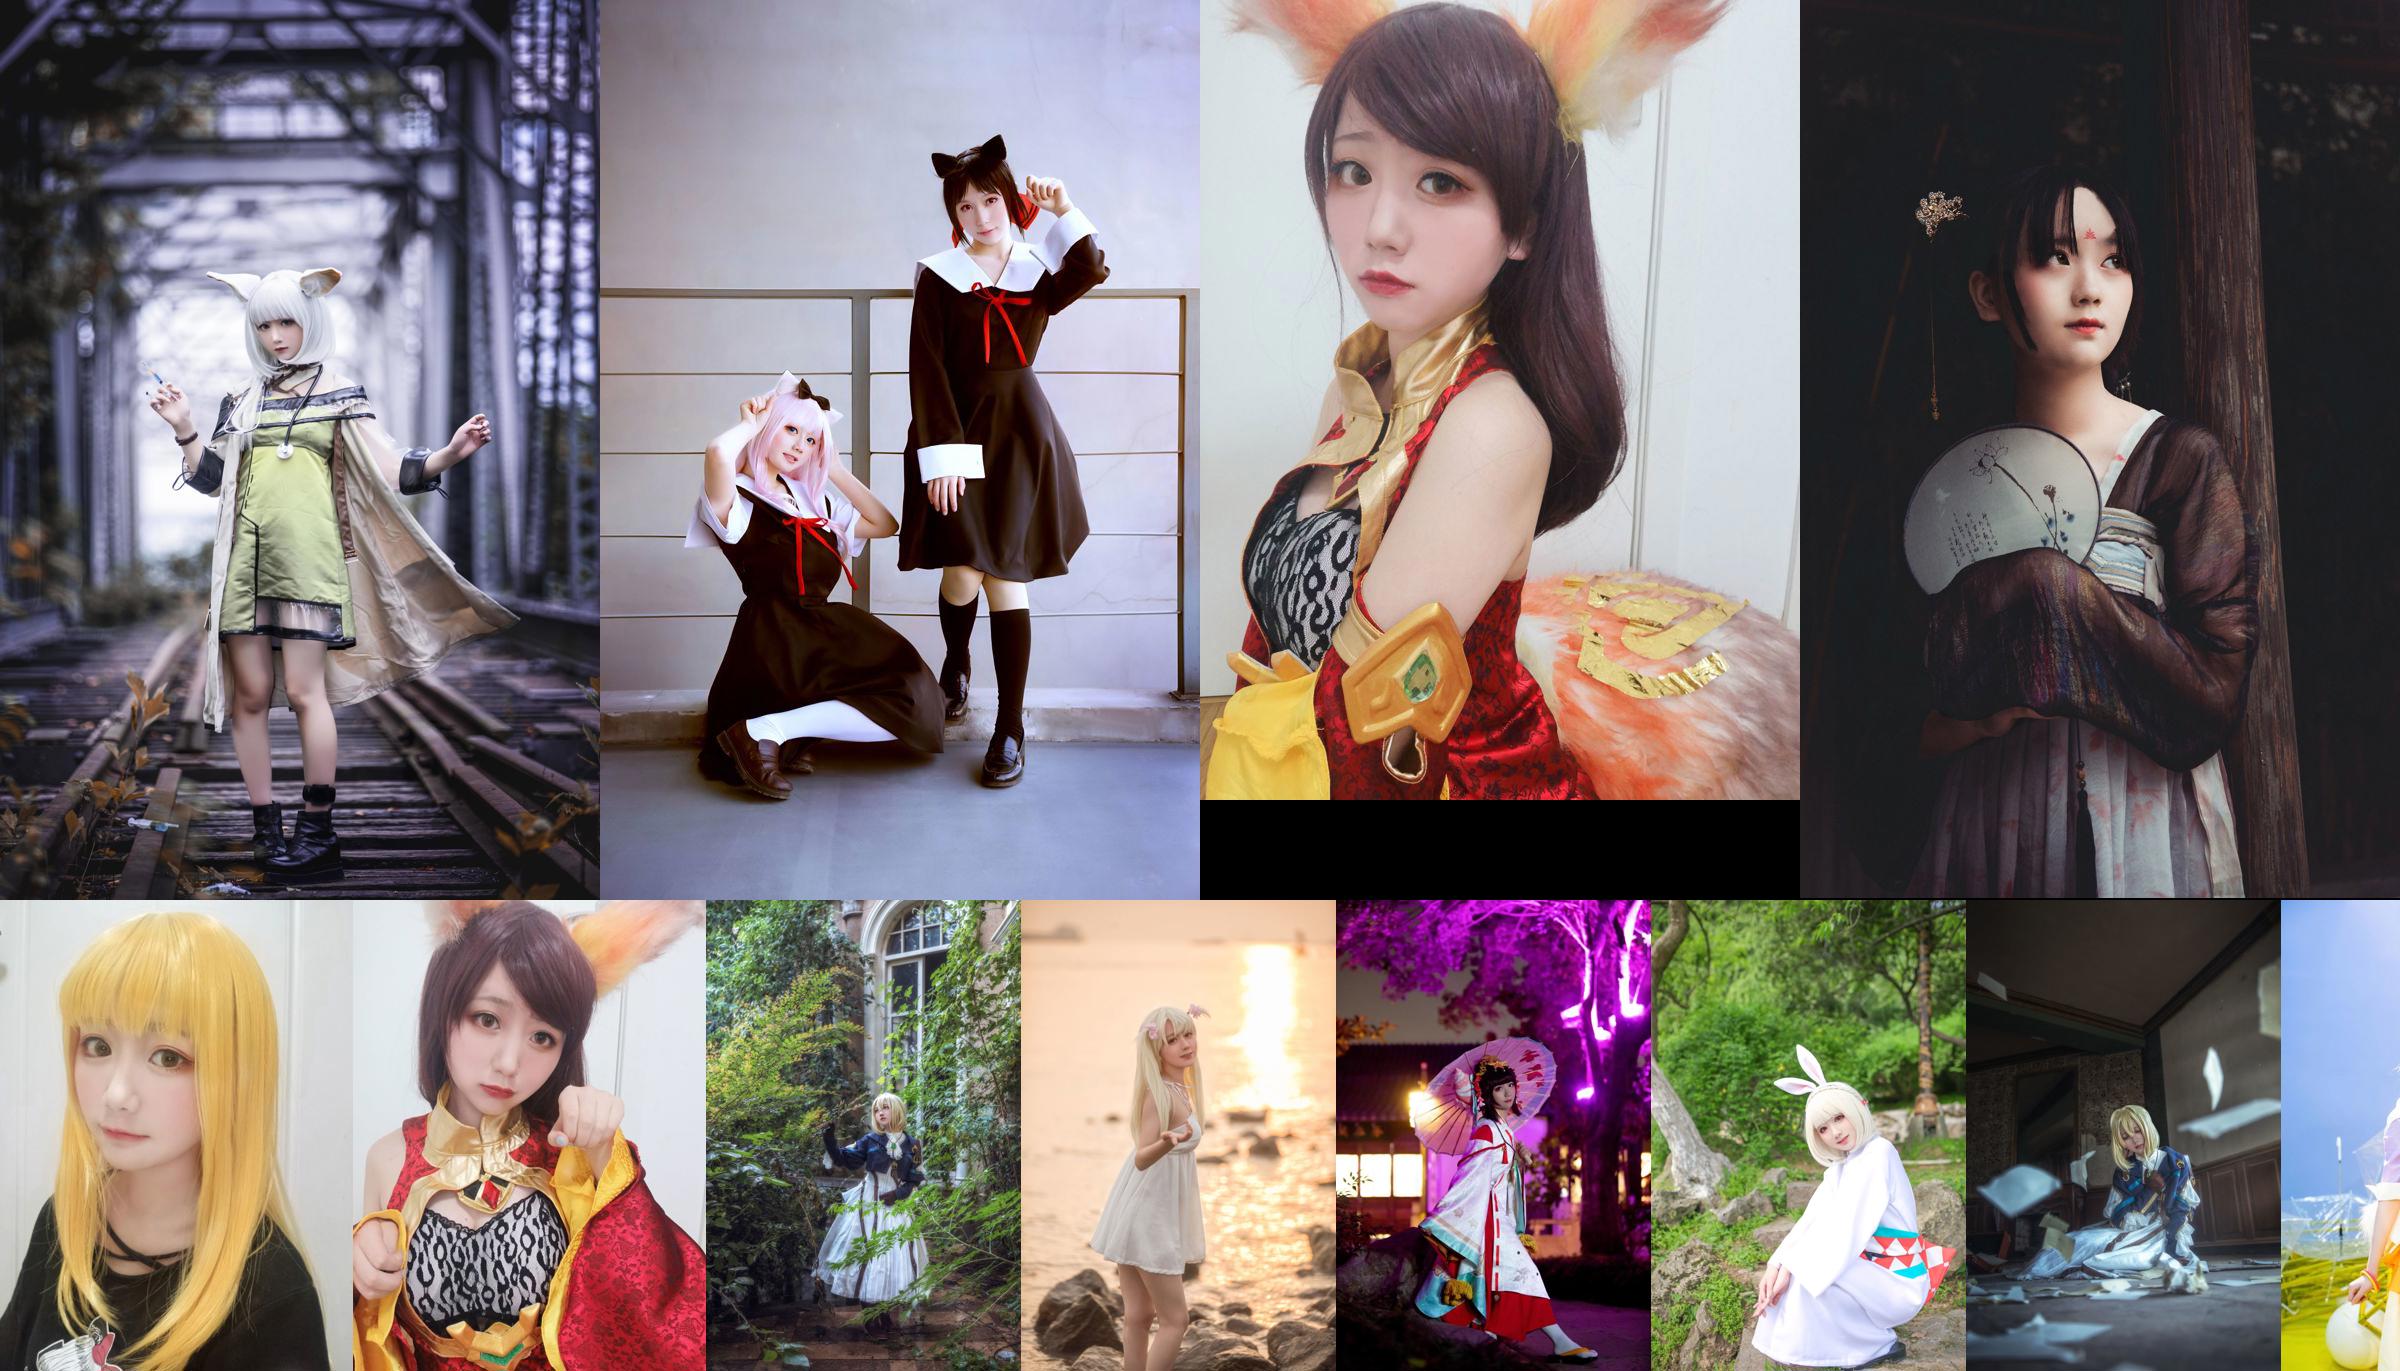 [Cosplay Photo] Anime blogger Xianyin sic - RE's life in another world from scratch Rem cat pajamas No.661e72 Page 4